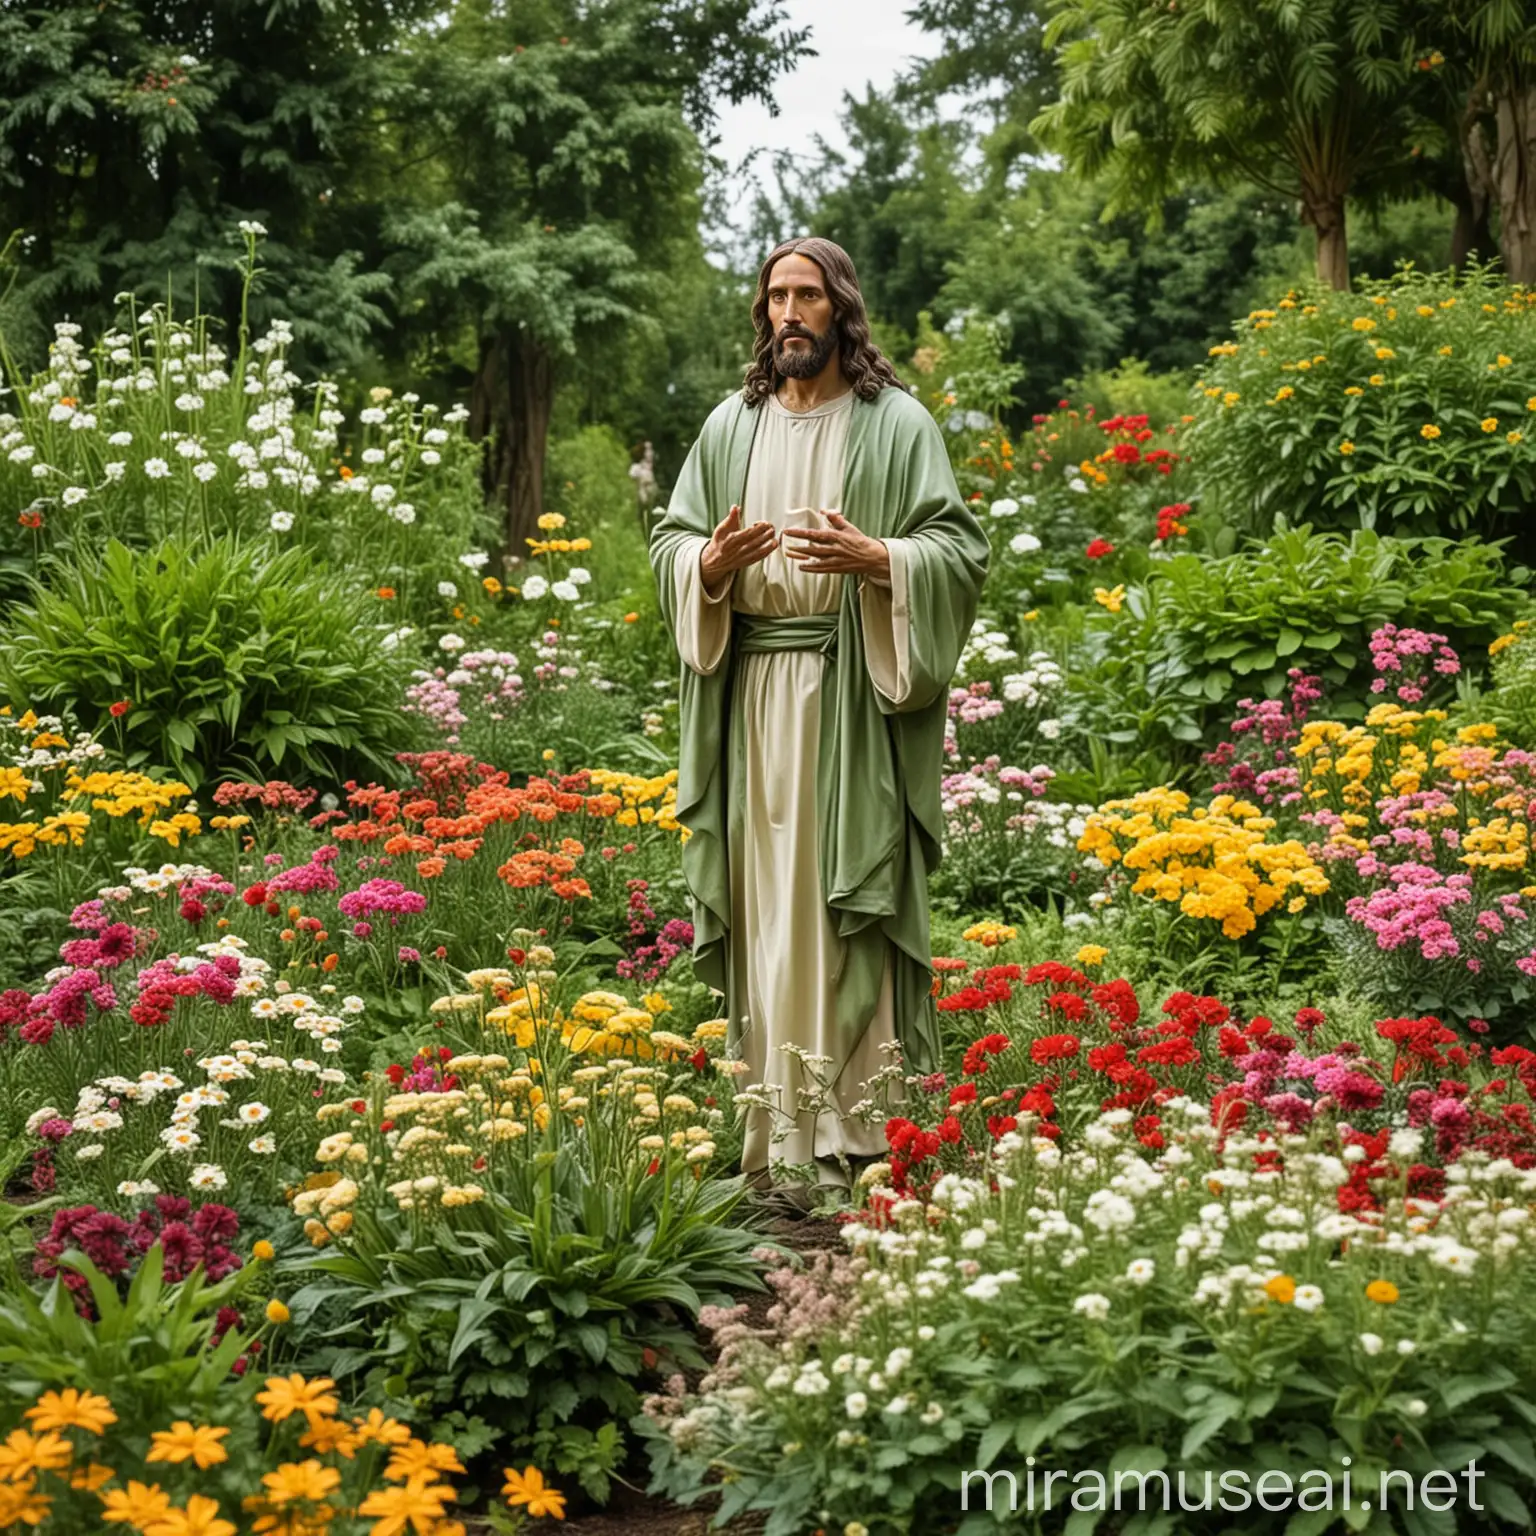 Jesus Christ Surrounded by Children in Lush Green Garden with Abundant Flowers